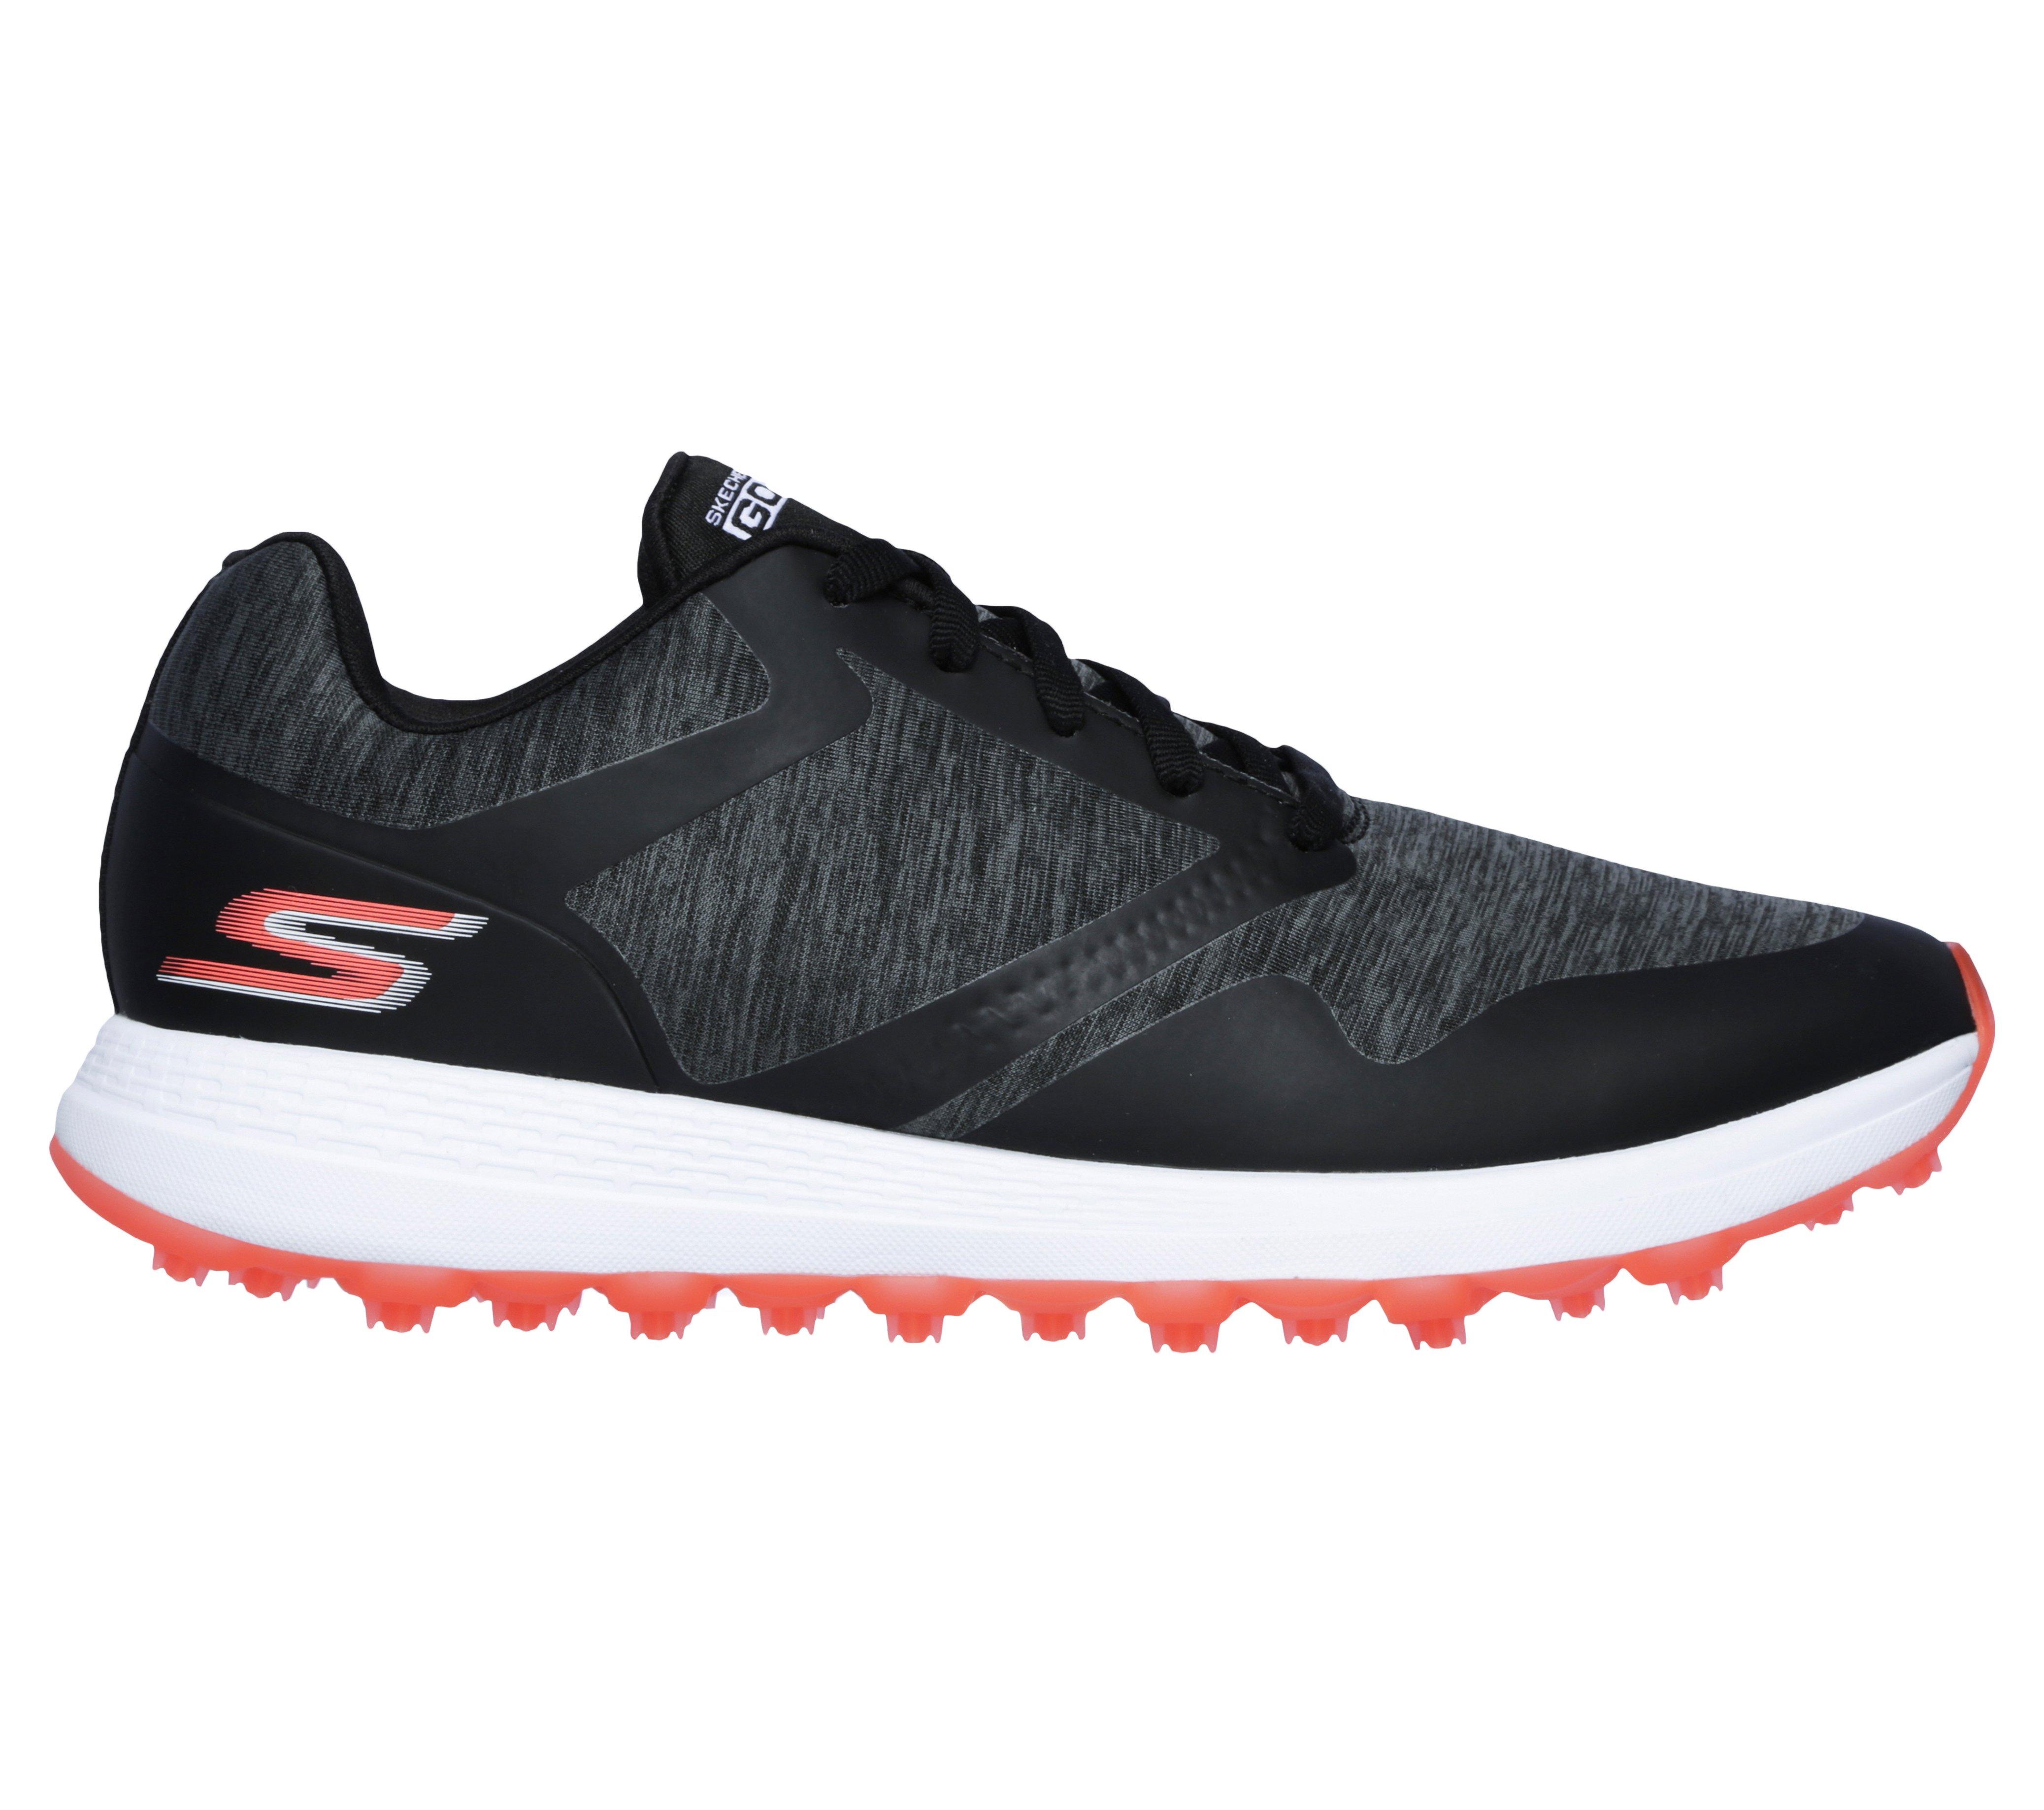 where can i buy skechers golf shoes in canada